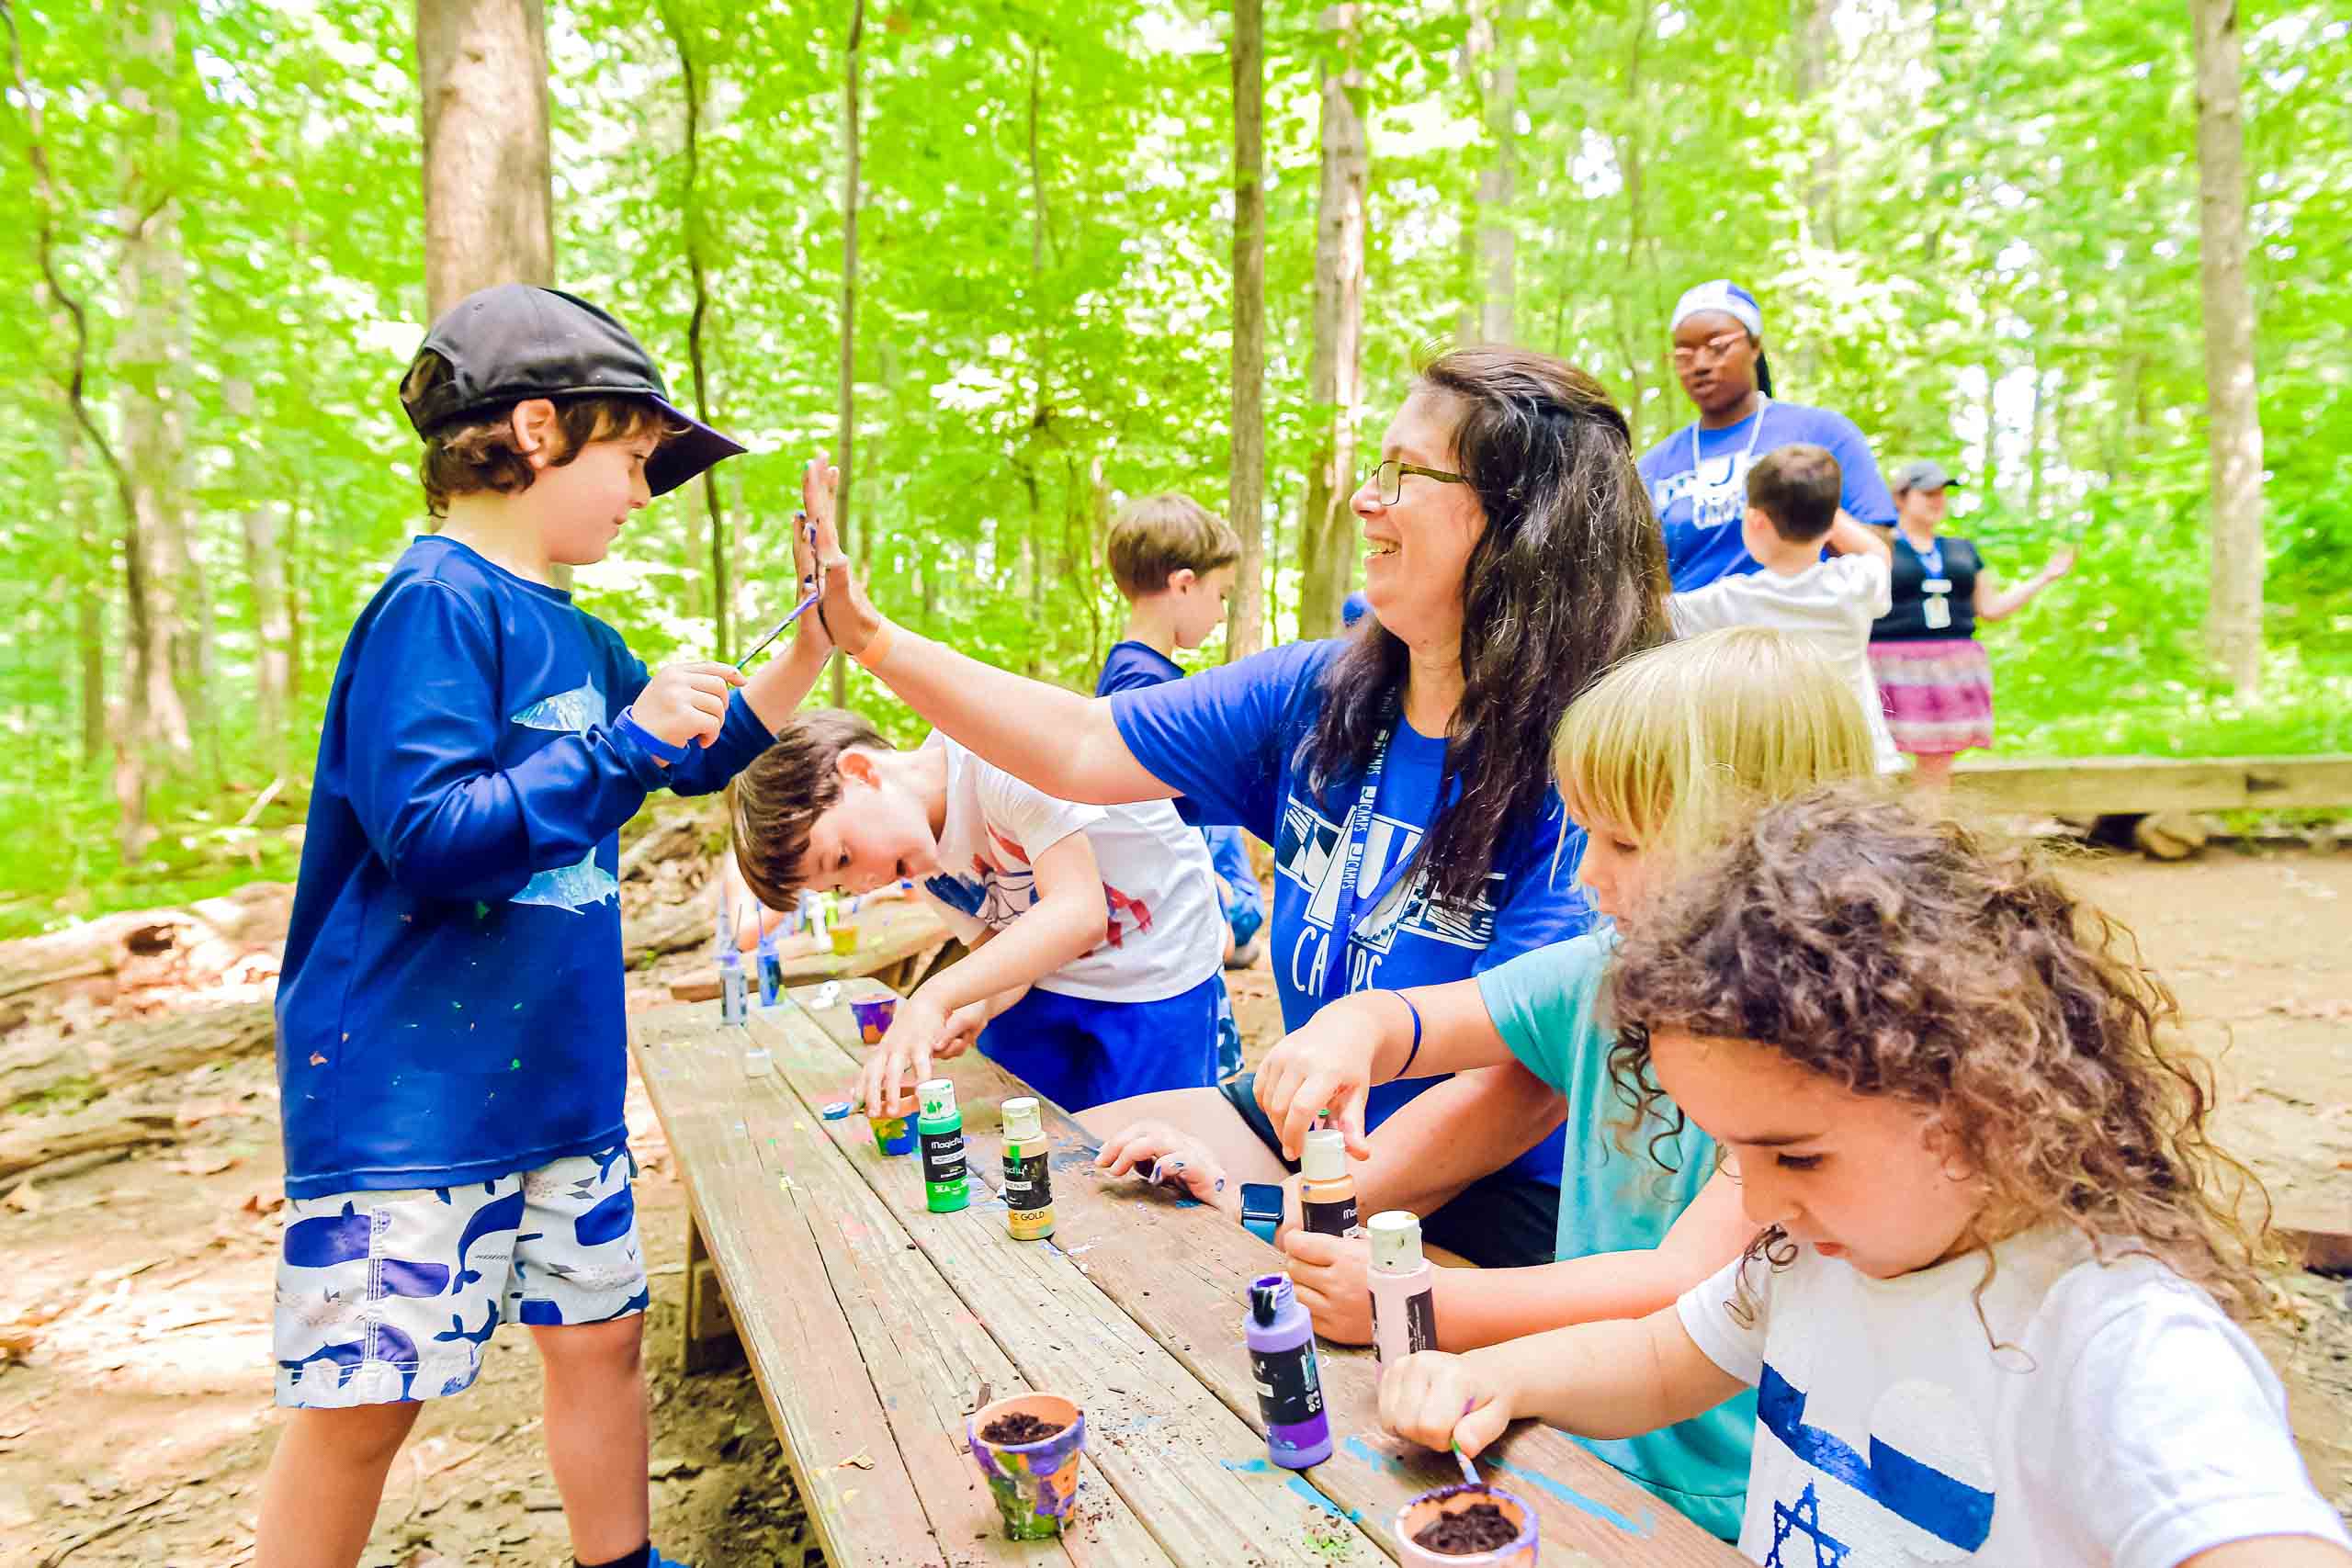 Campers doing crafts in the woods.